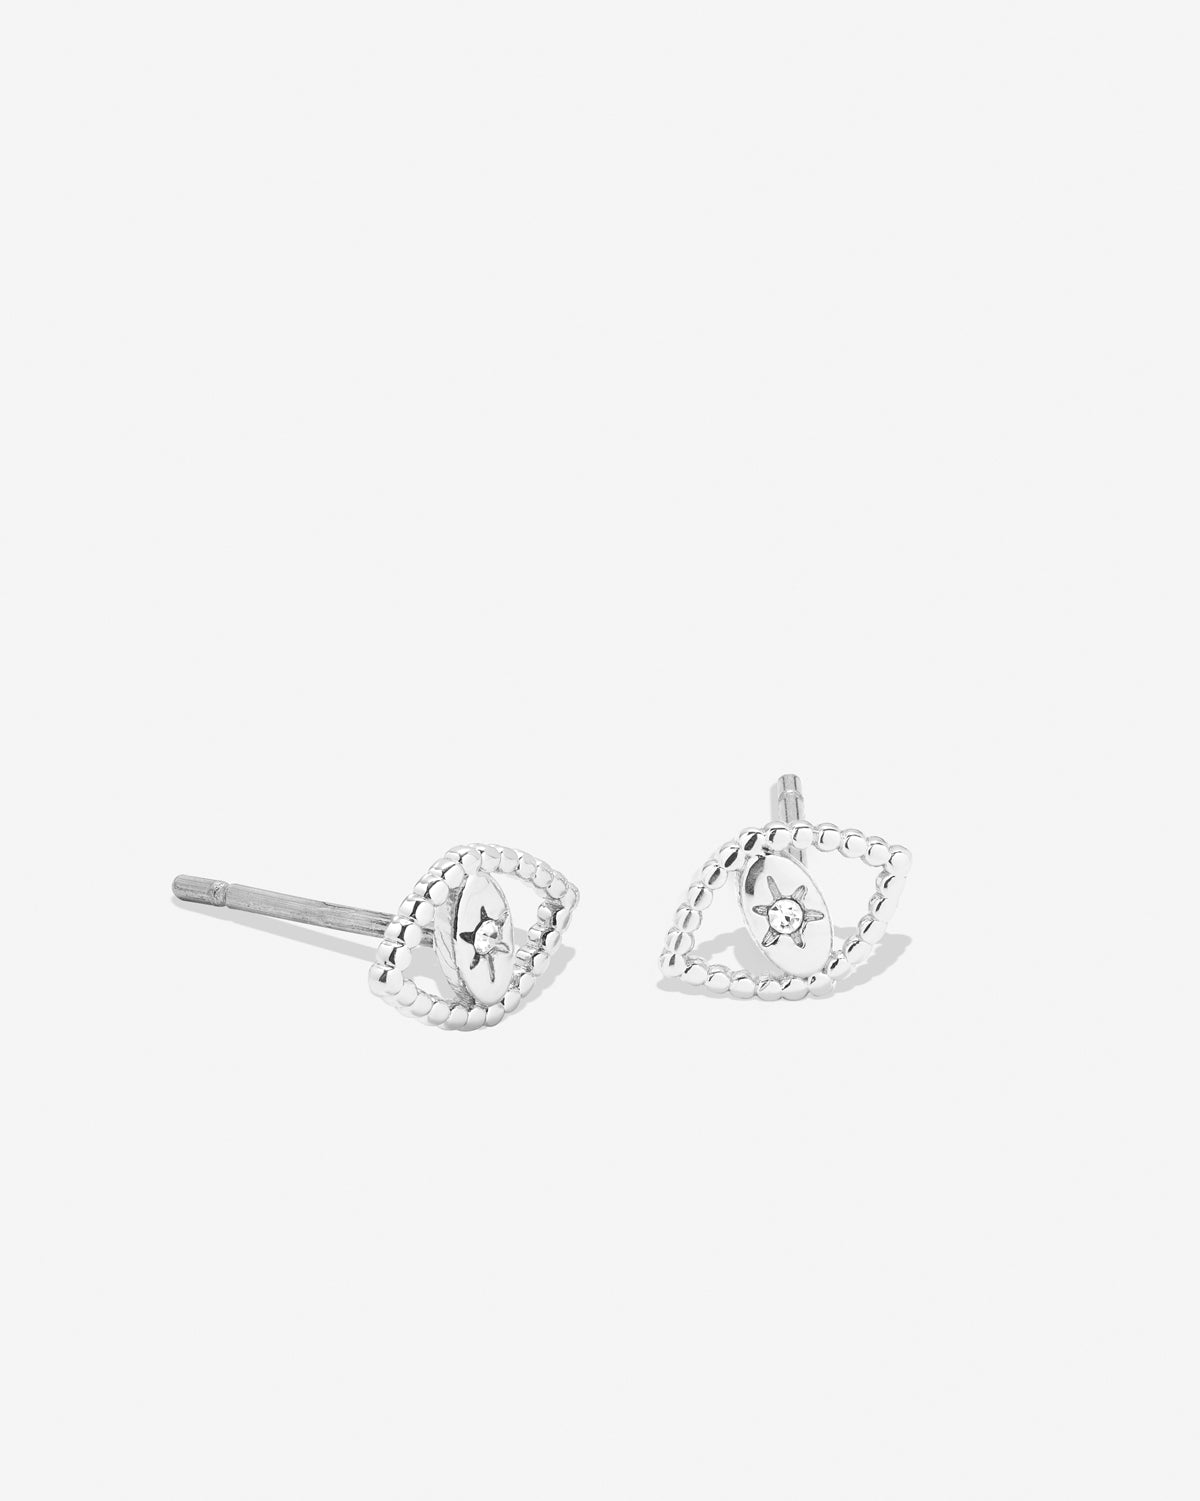 Bryan Anthonys Just For Luck Collection Evil Eye Earrings Silver